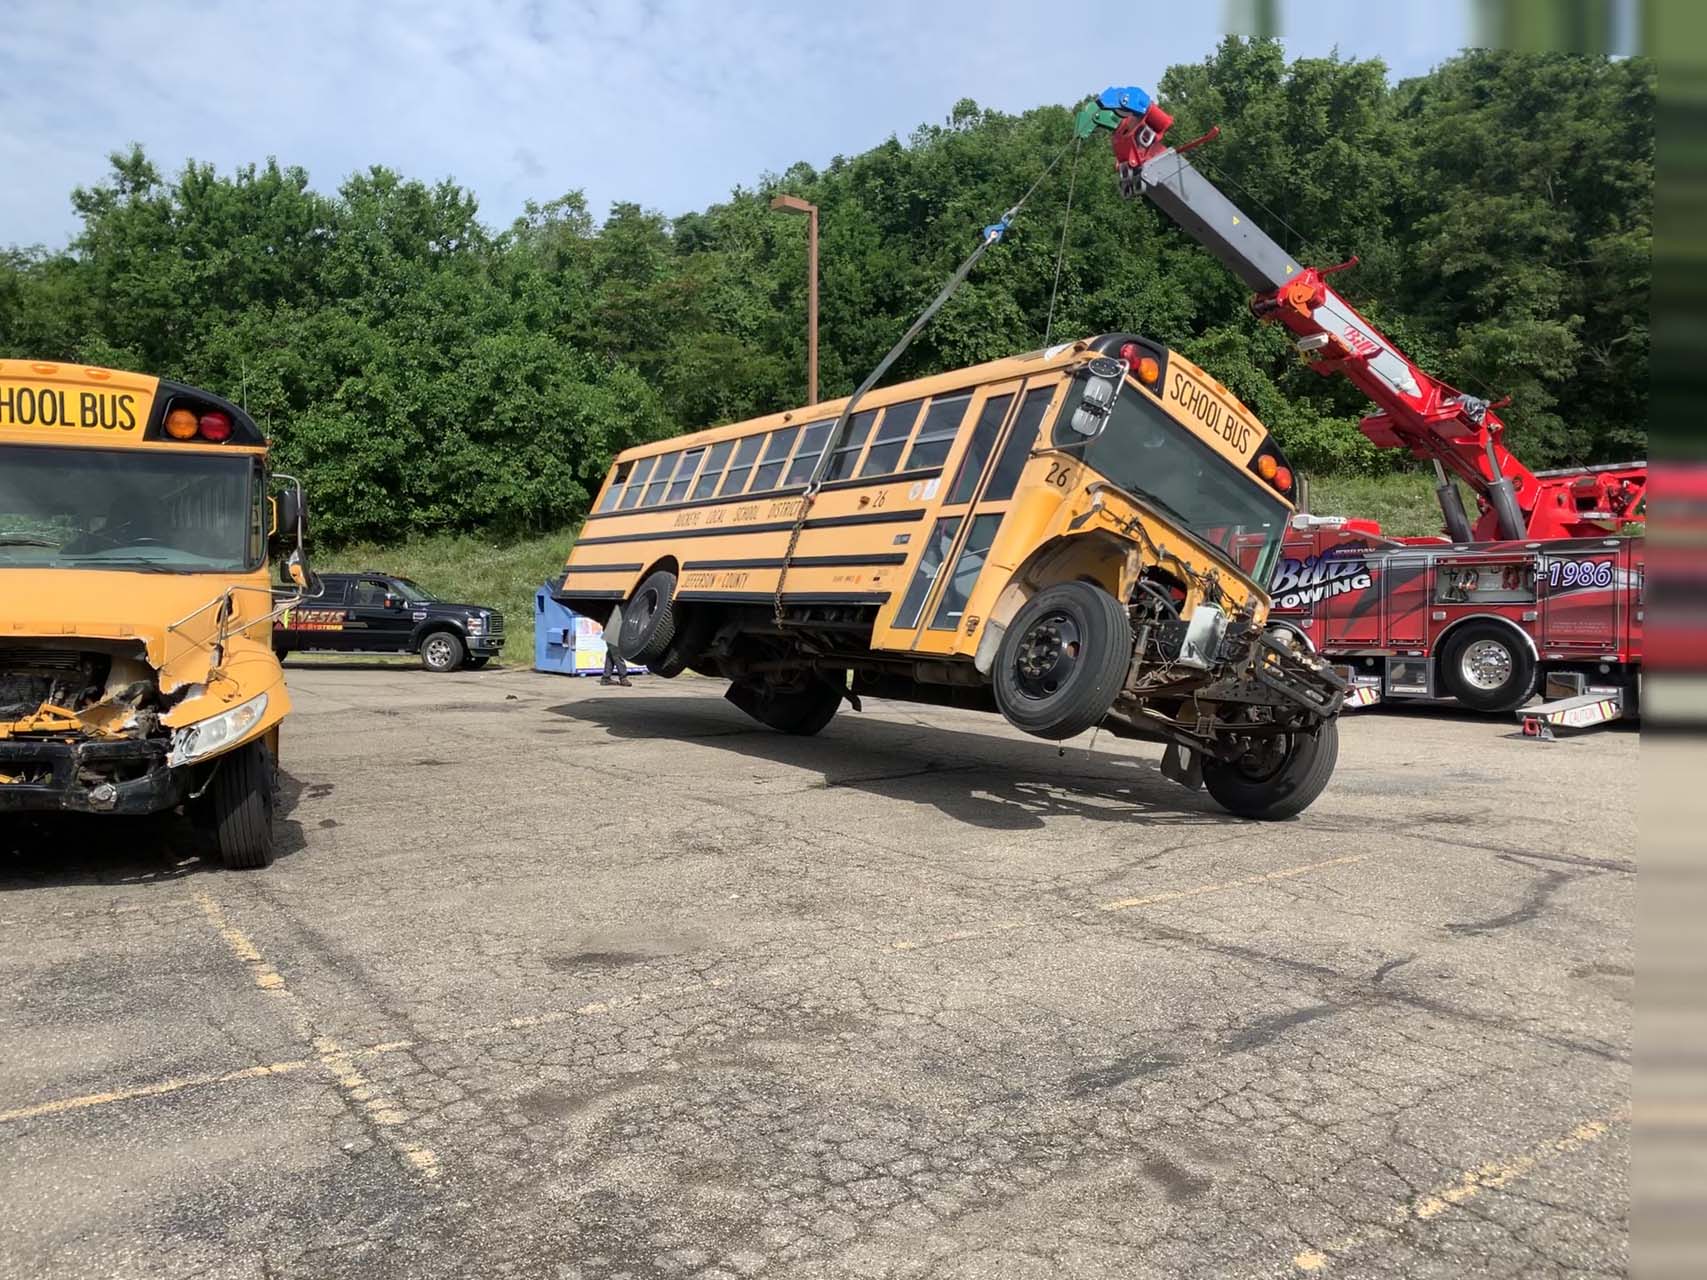 Ohio School Bus Crash Prompts Mock Casualty Training with First